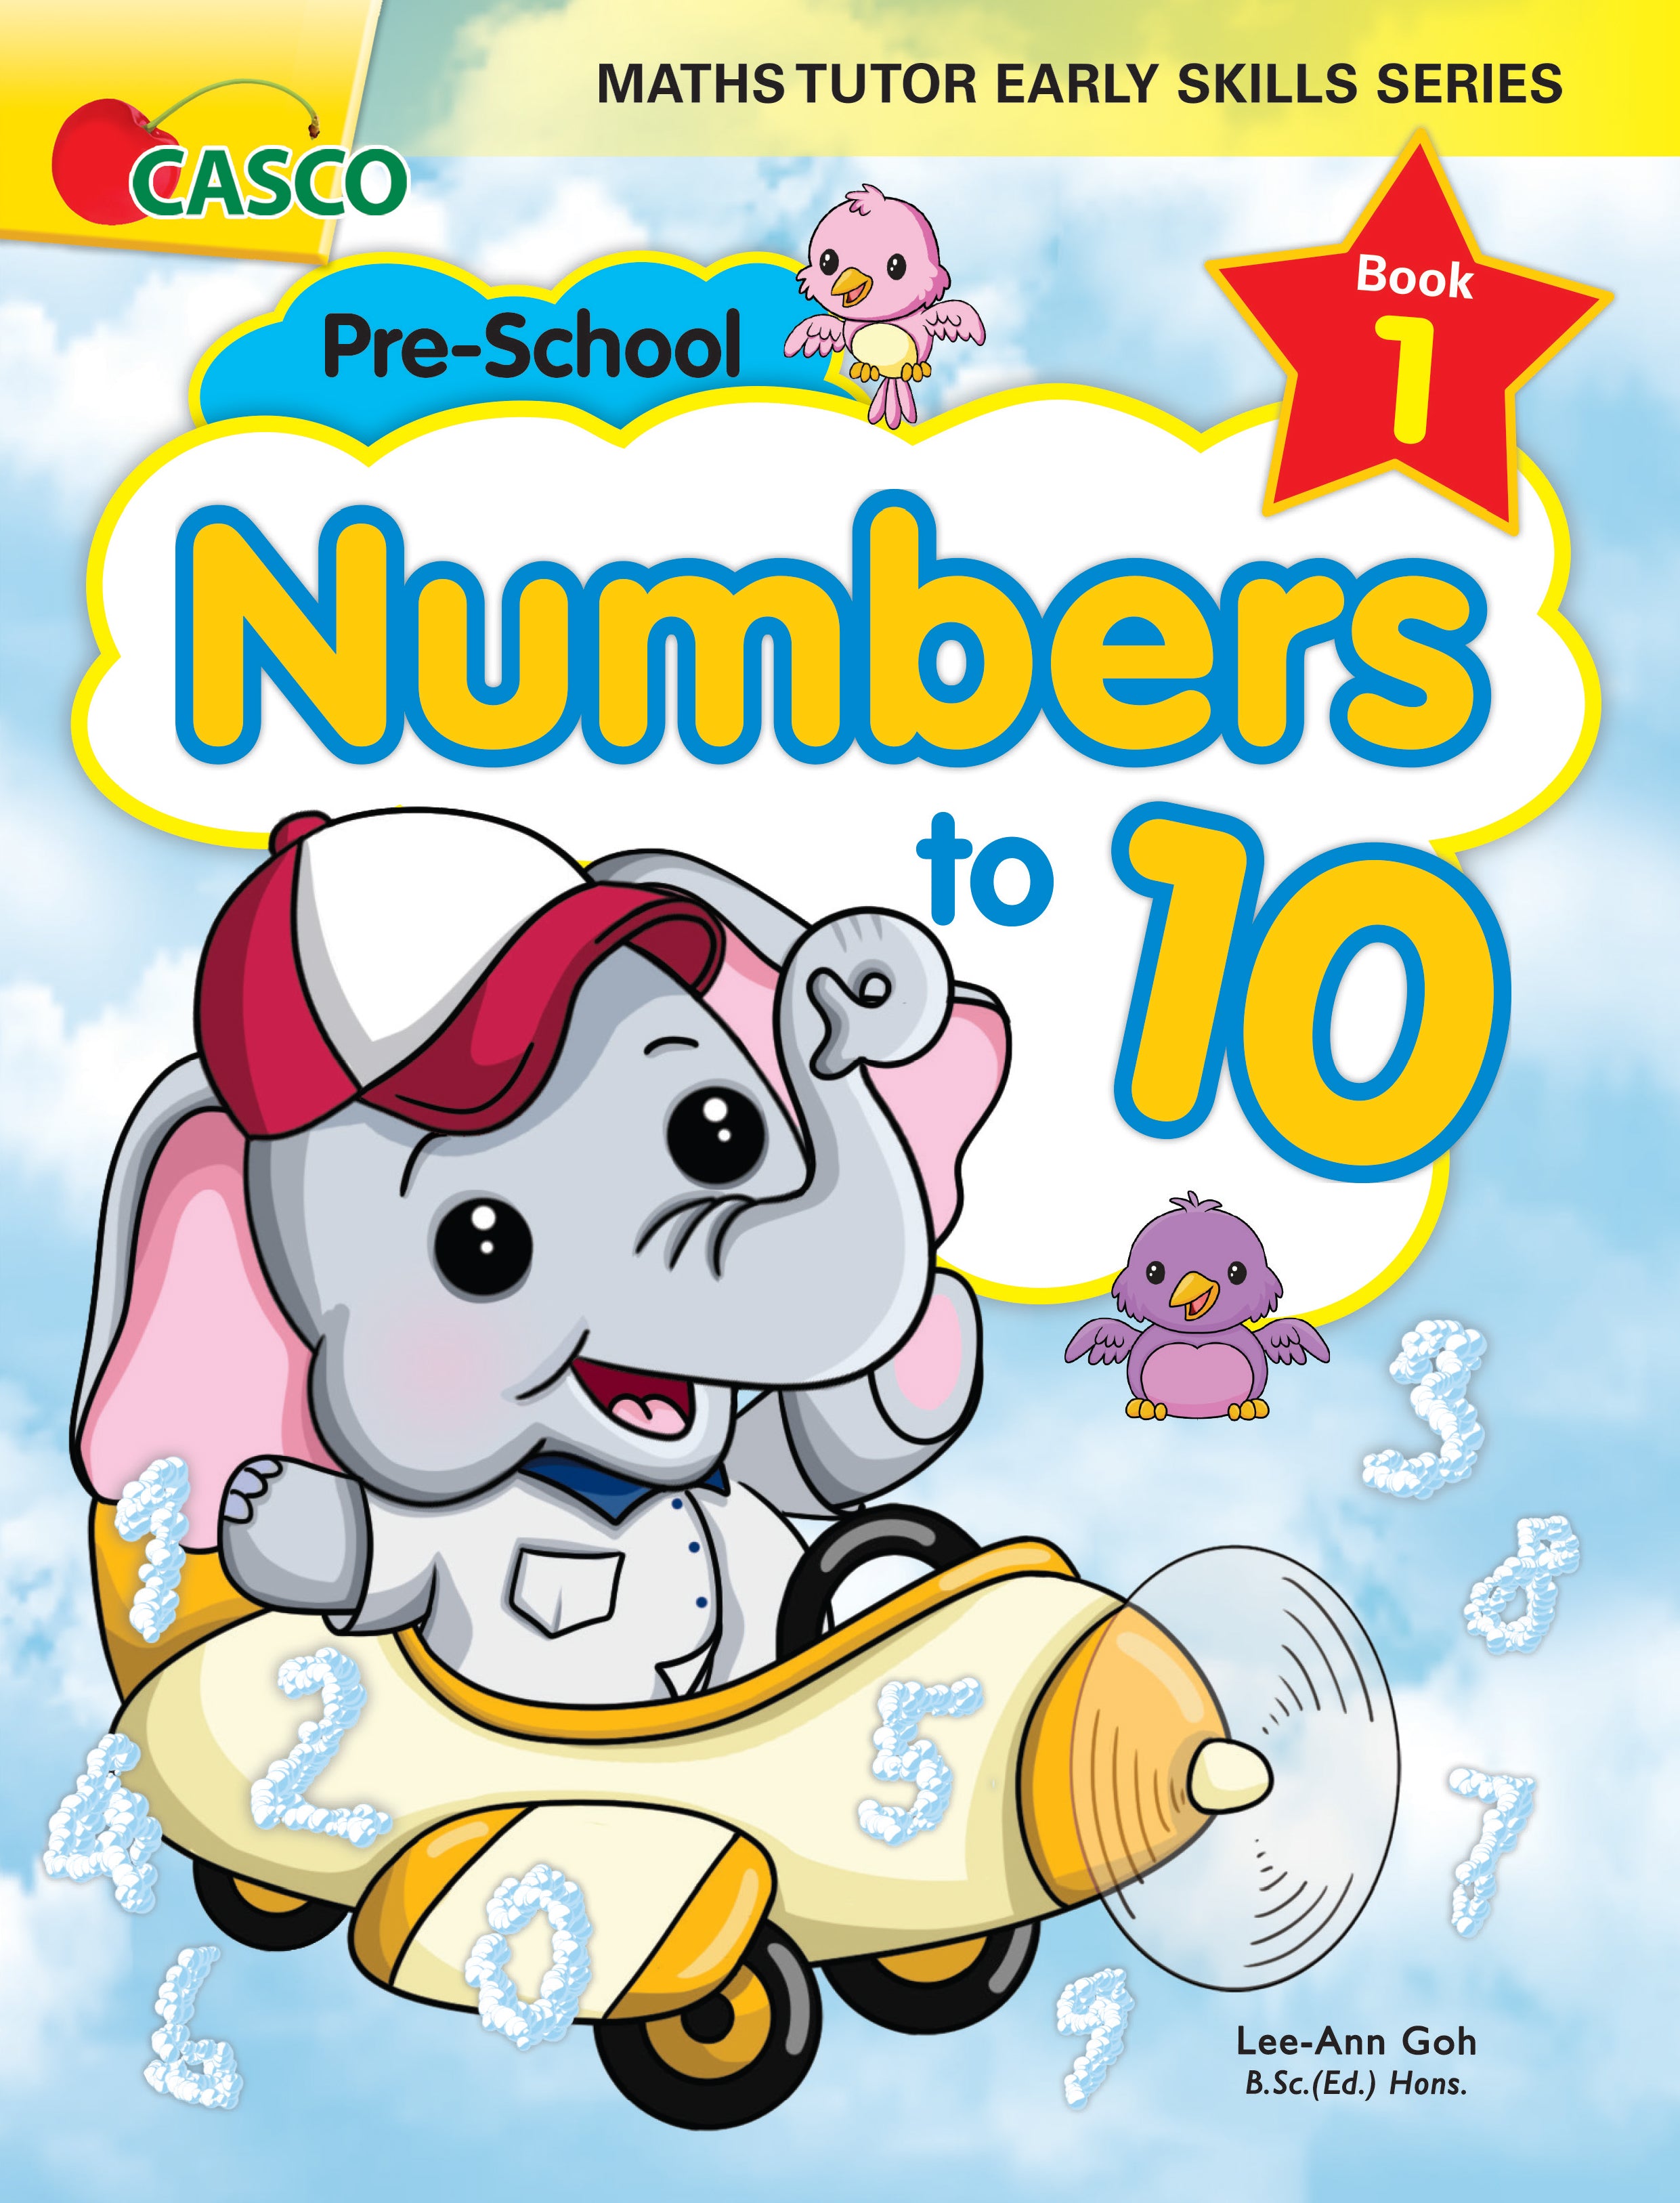 Maths Tutor Early Skills Series (Book 1 to 10)